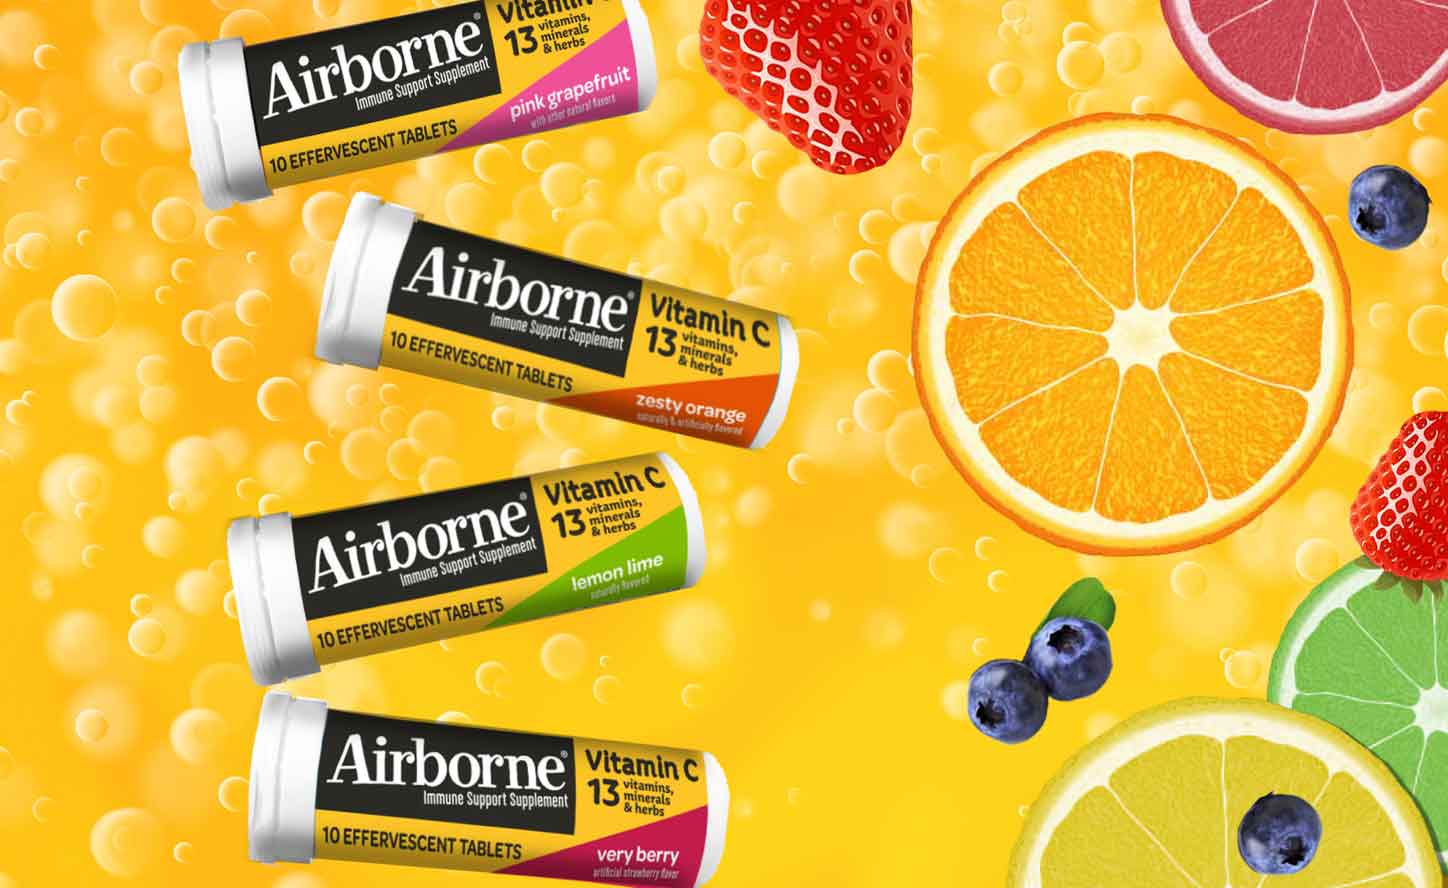 Airborne Effervescent tablets come in a range of fruit flavors